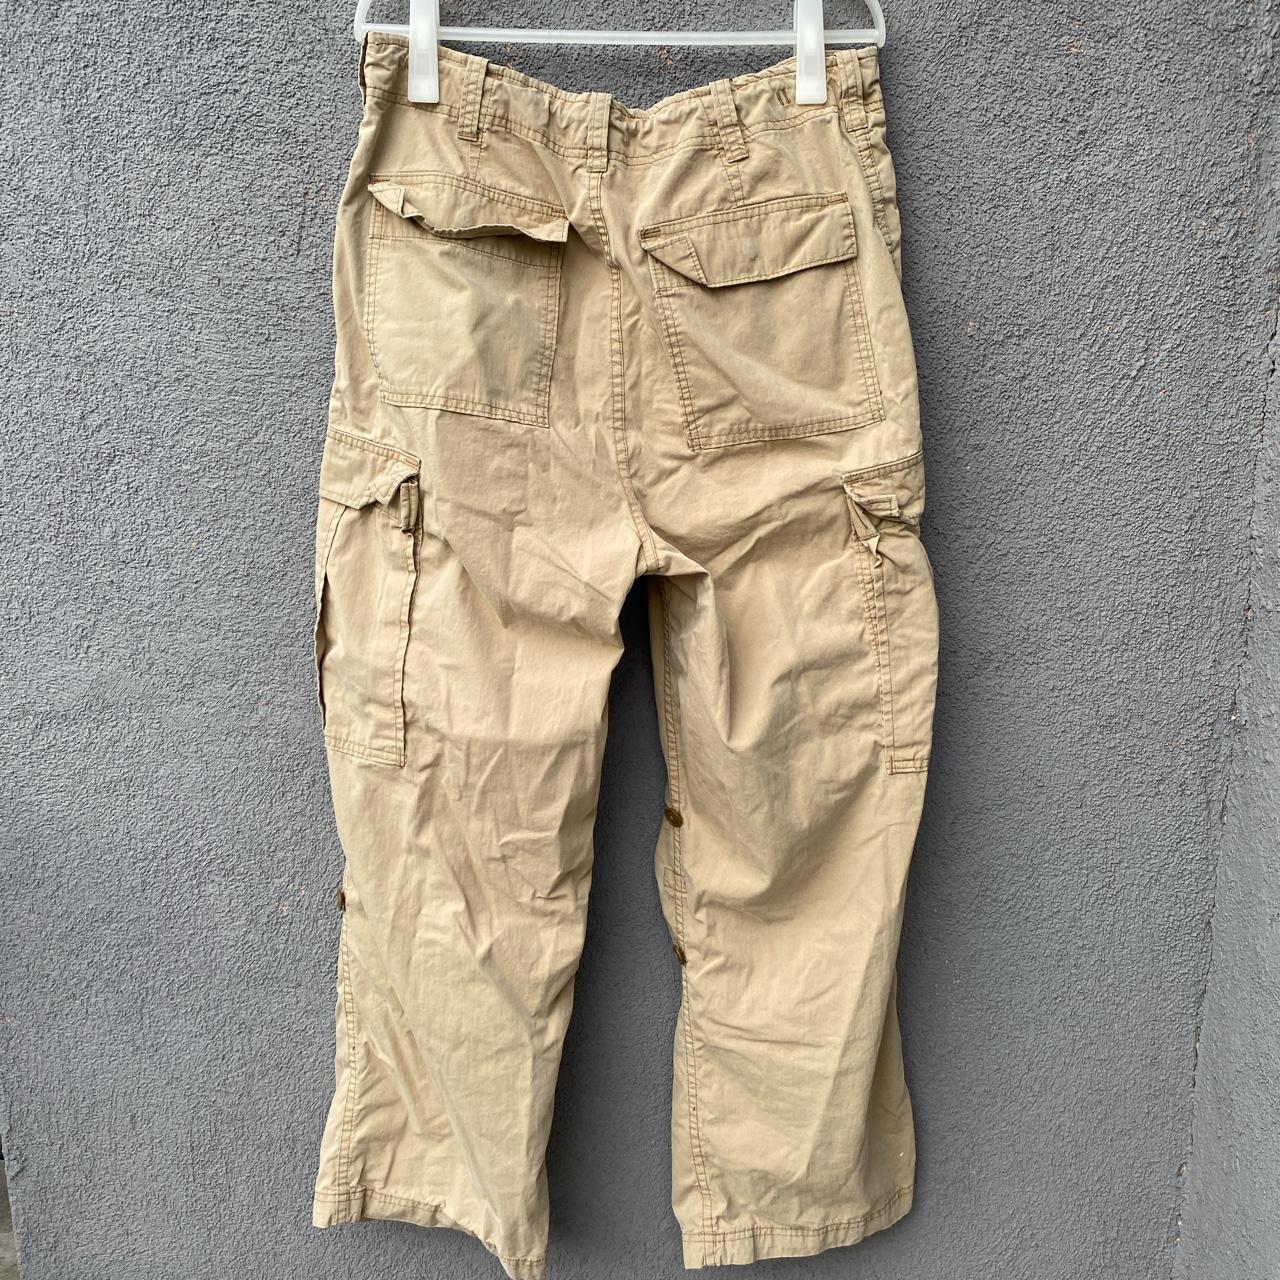 Product Image 2 - Abercrombie & Fitch Cargo Pants/Military